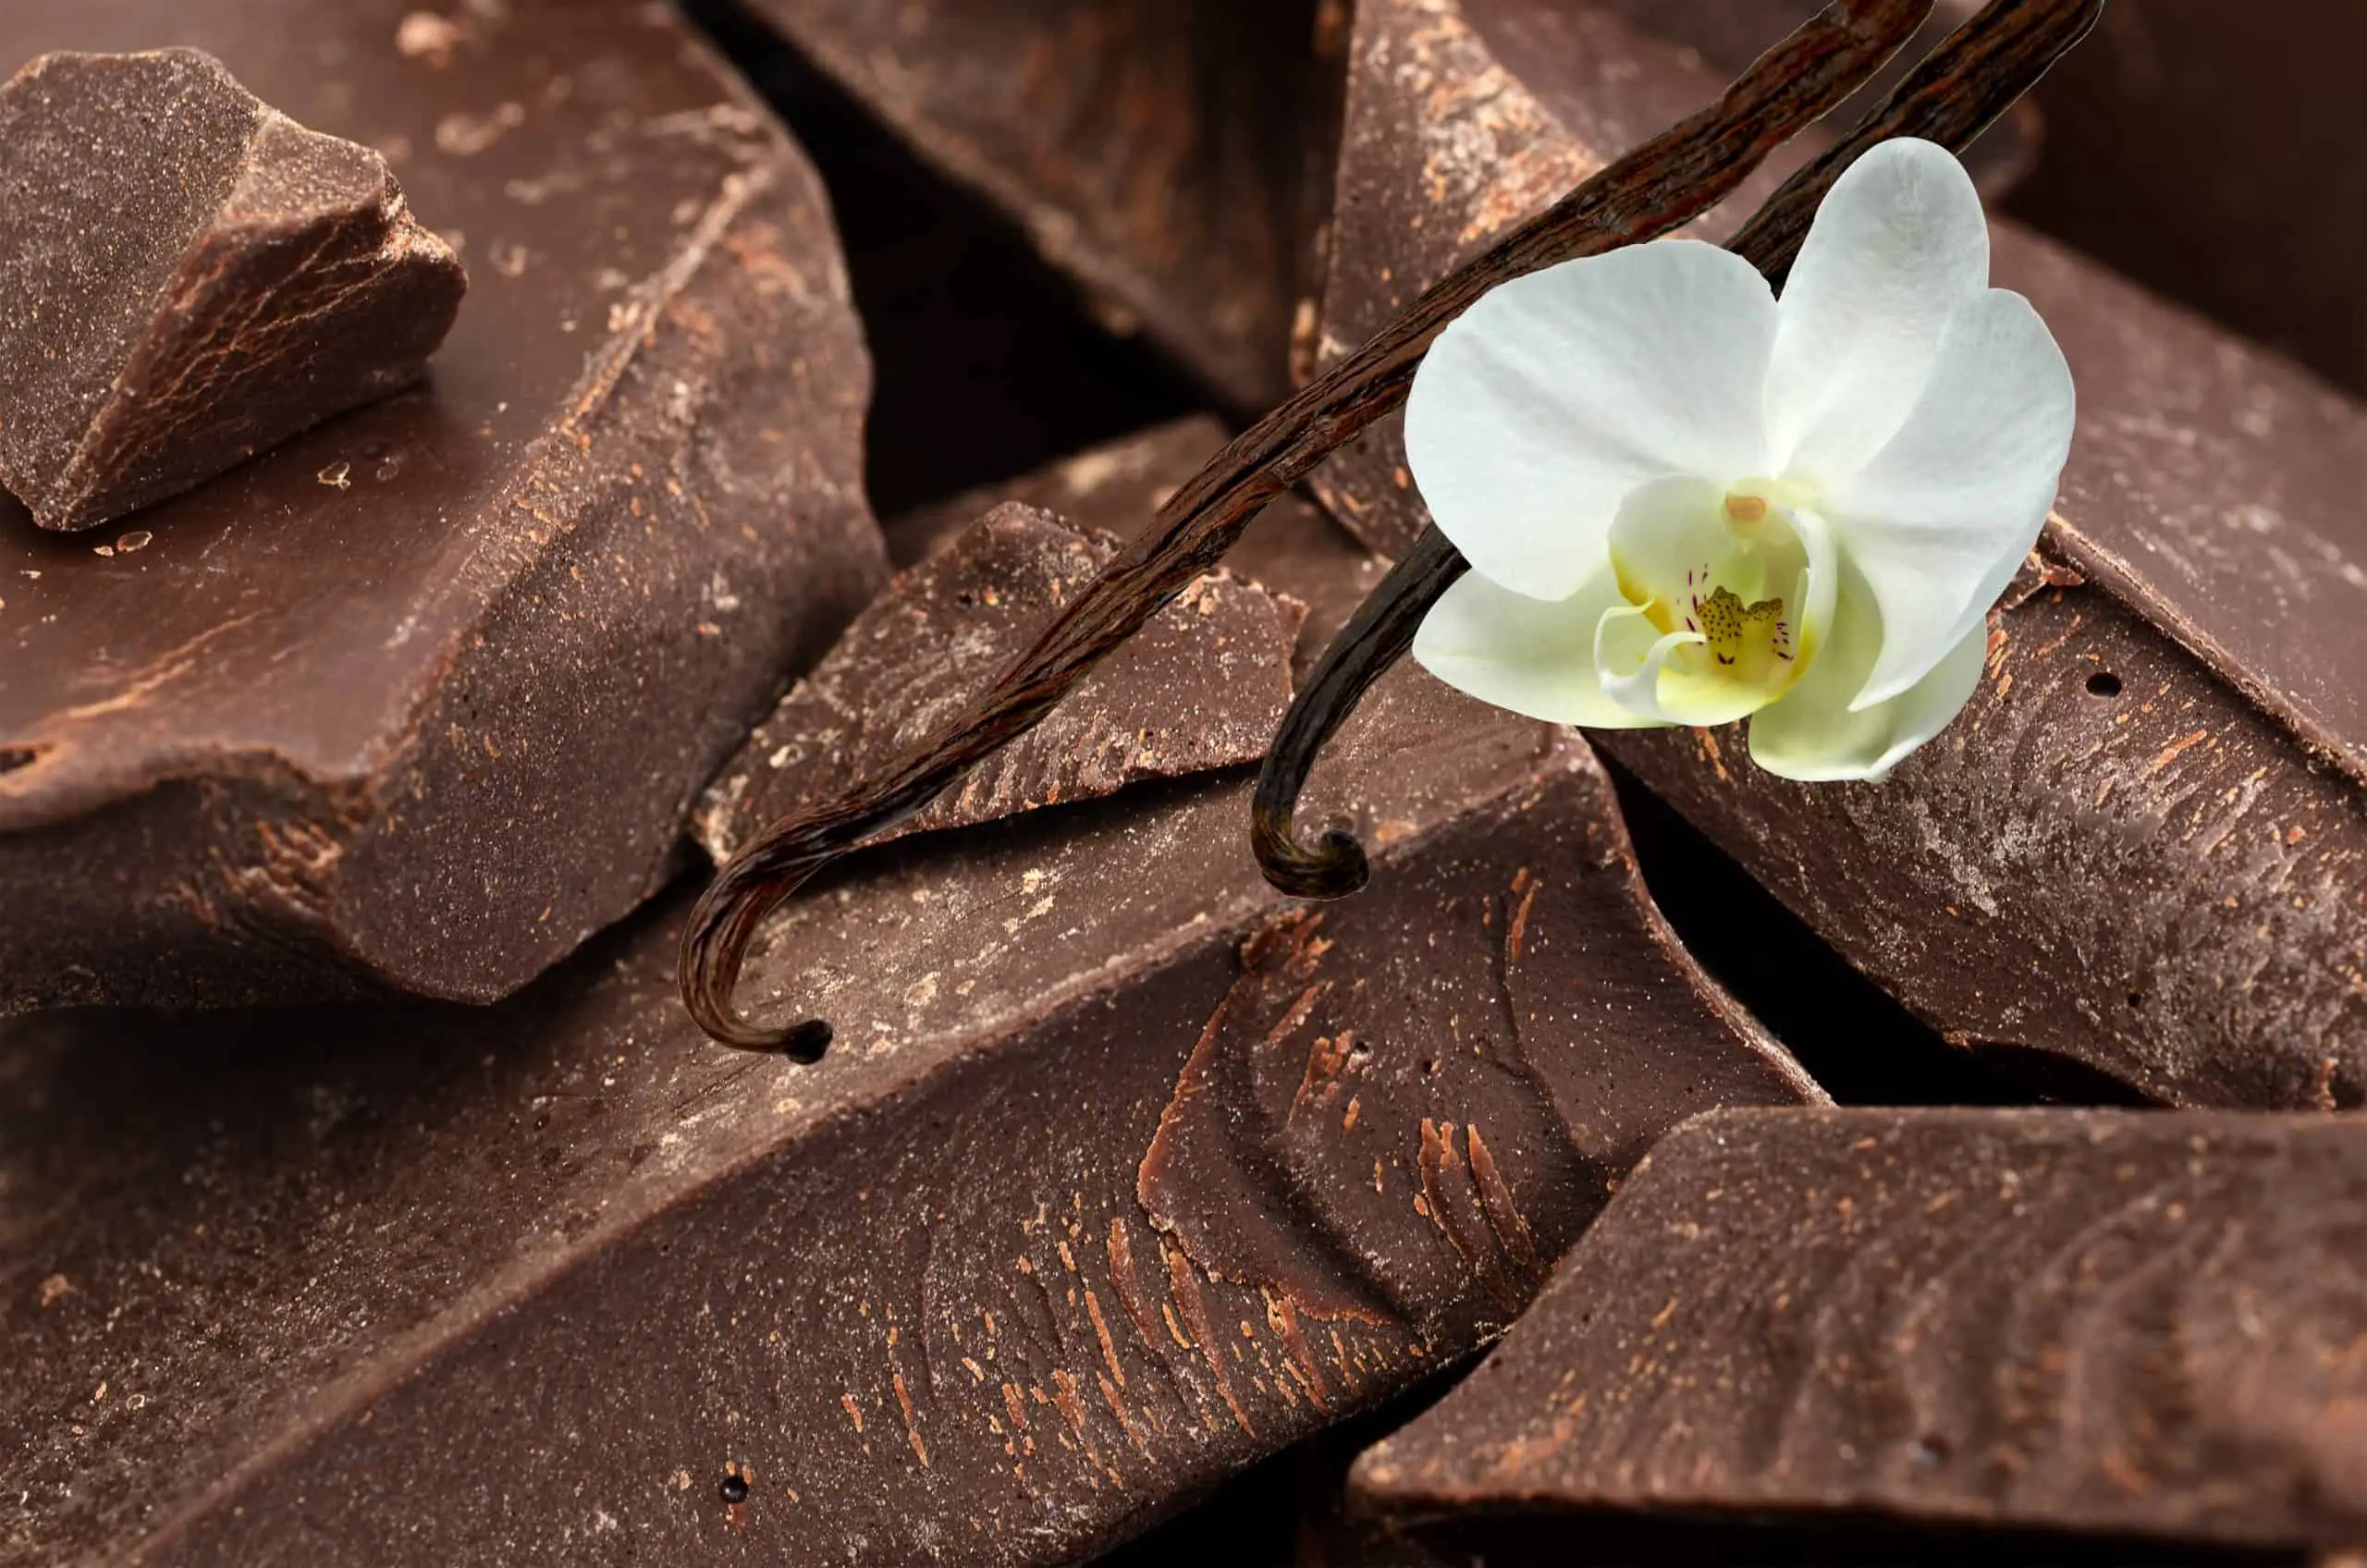 Can Chocolate Get Moldy? Does Mold On Chocolate Get You Sick?